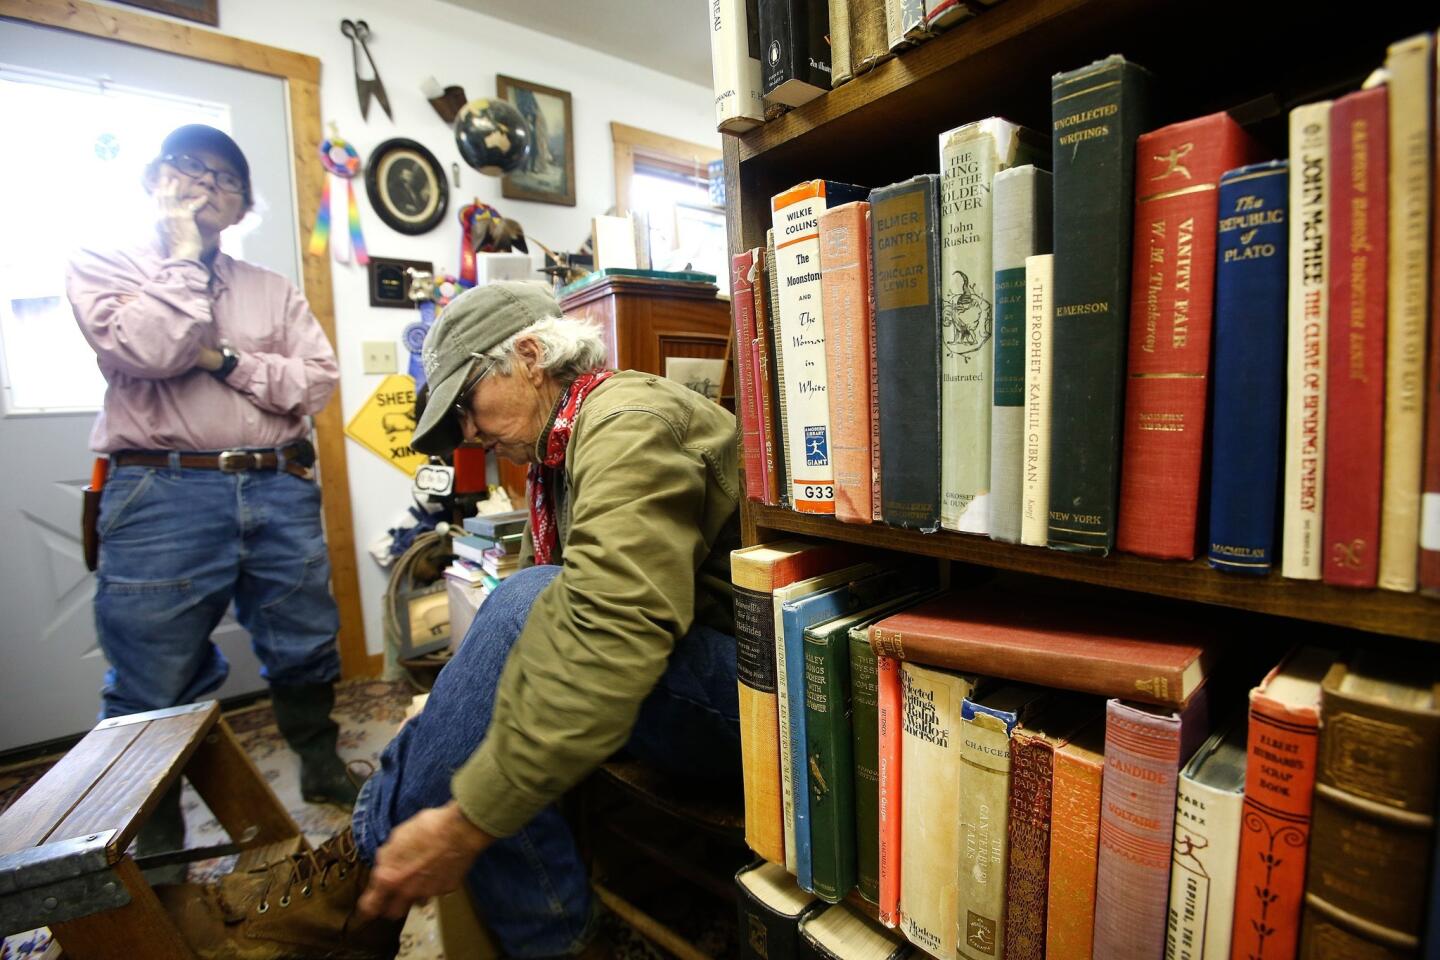 Lynda German, right, and Polly Hinds own Mad Dog and the Pilgrim, a bookstore in Sweetwater Station, Wyo. The longtime partners moved from Denver and bought a ranch, where they sell books out of their two-story barn.